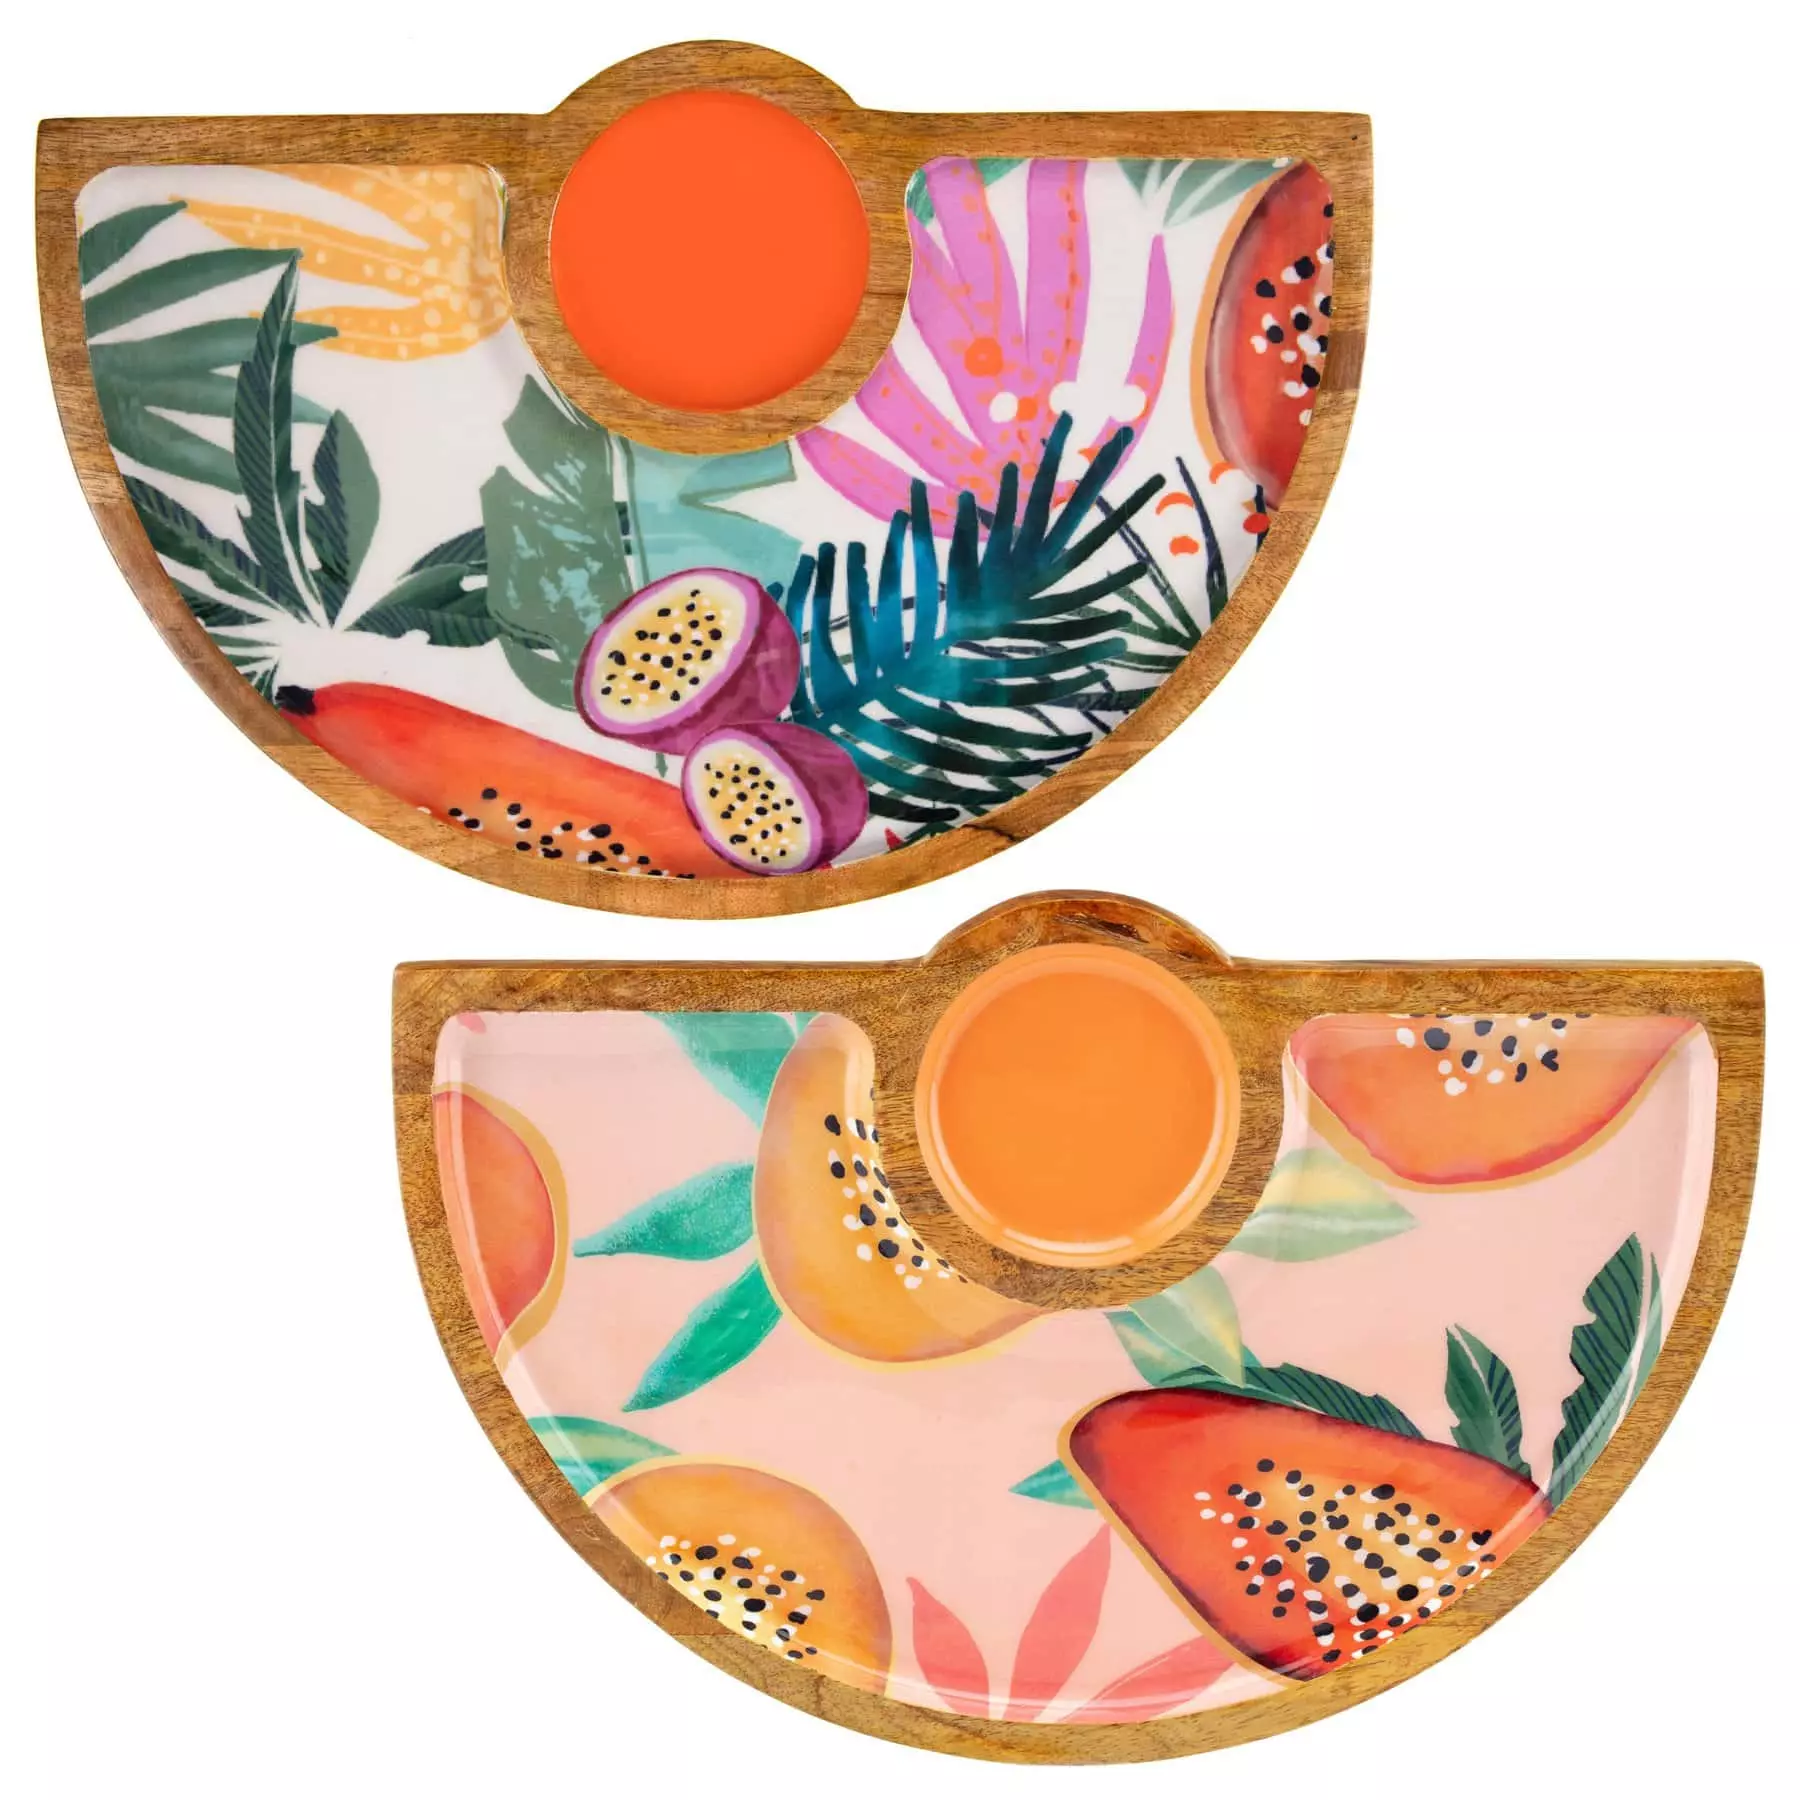 Bright tropical prints on cushions and plates